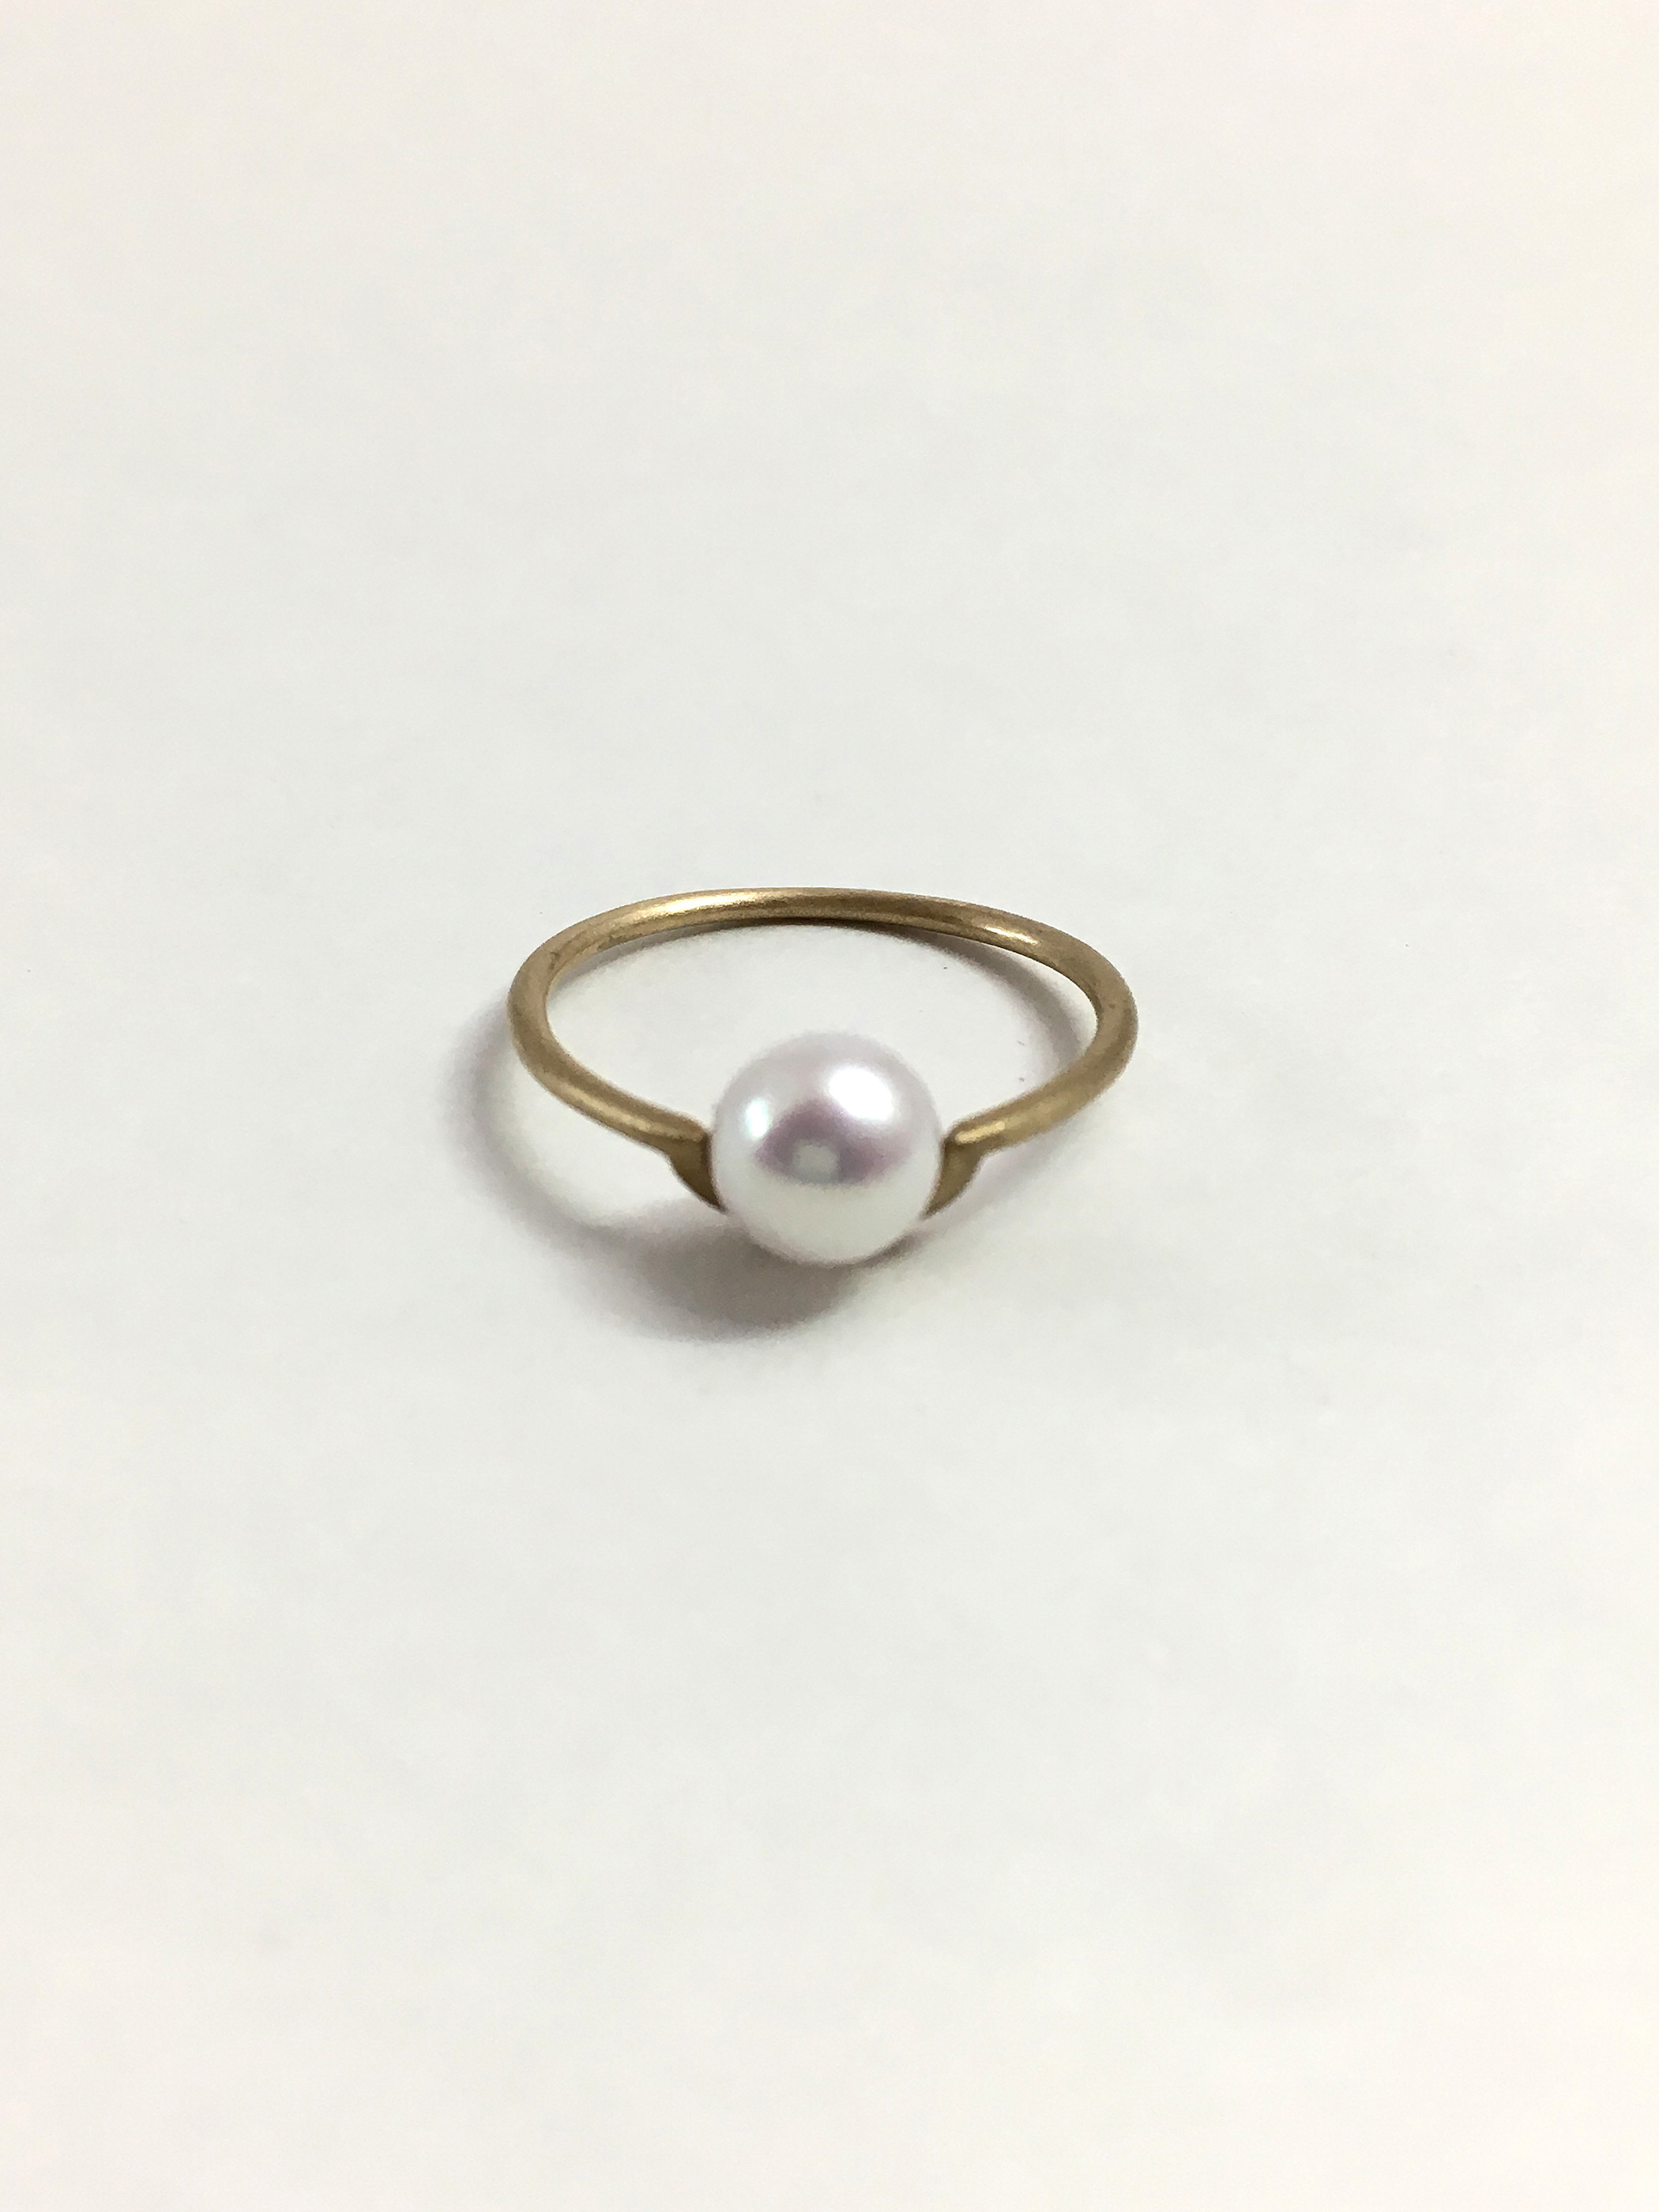 A BUNNY TAIL RING